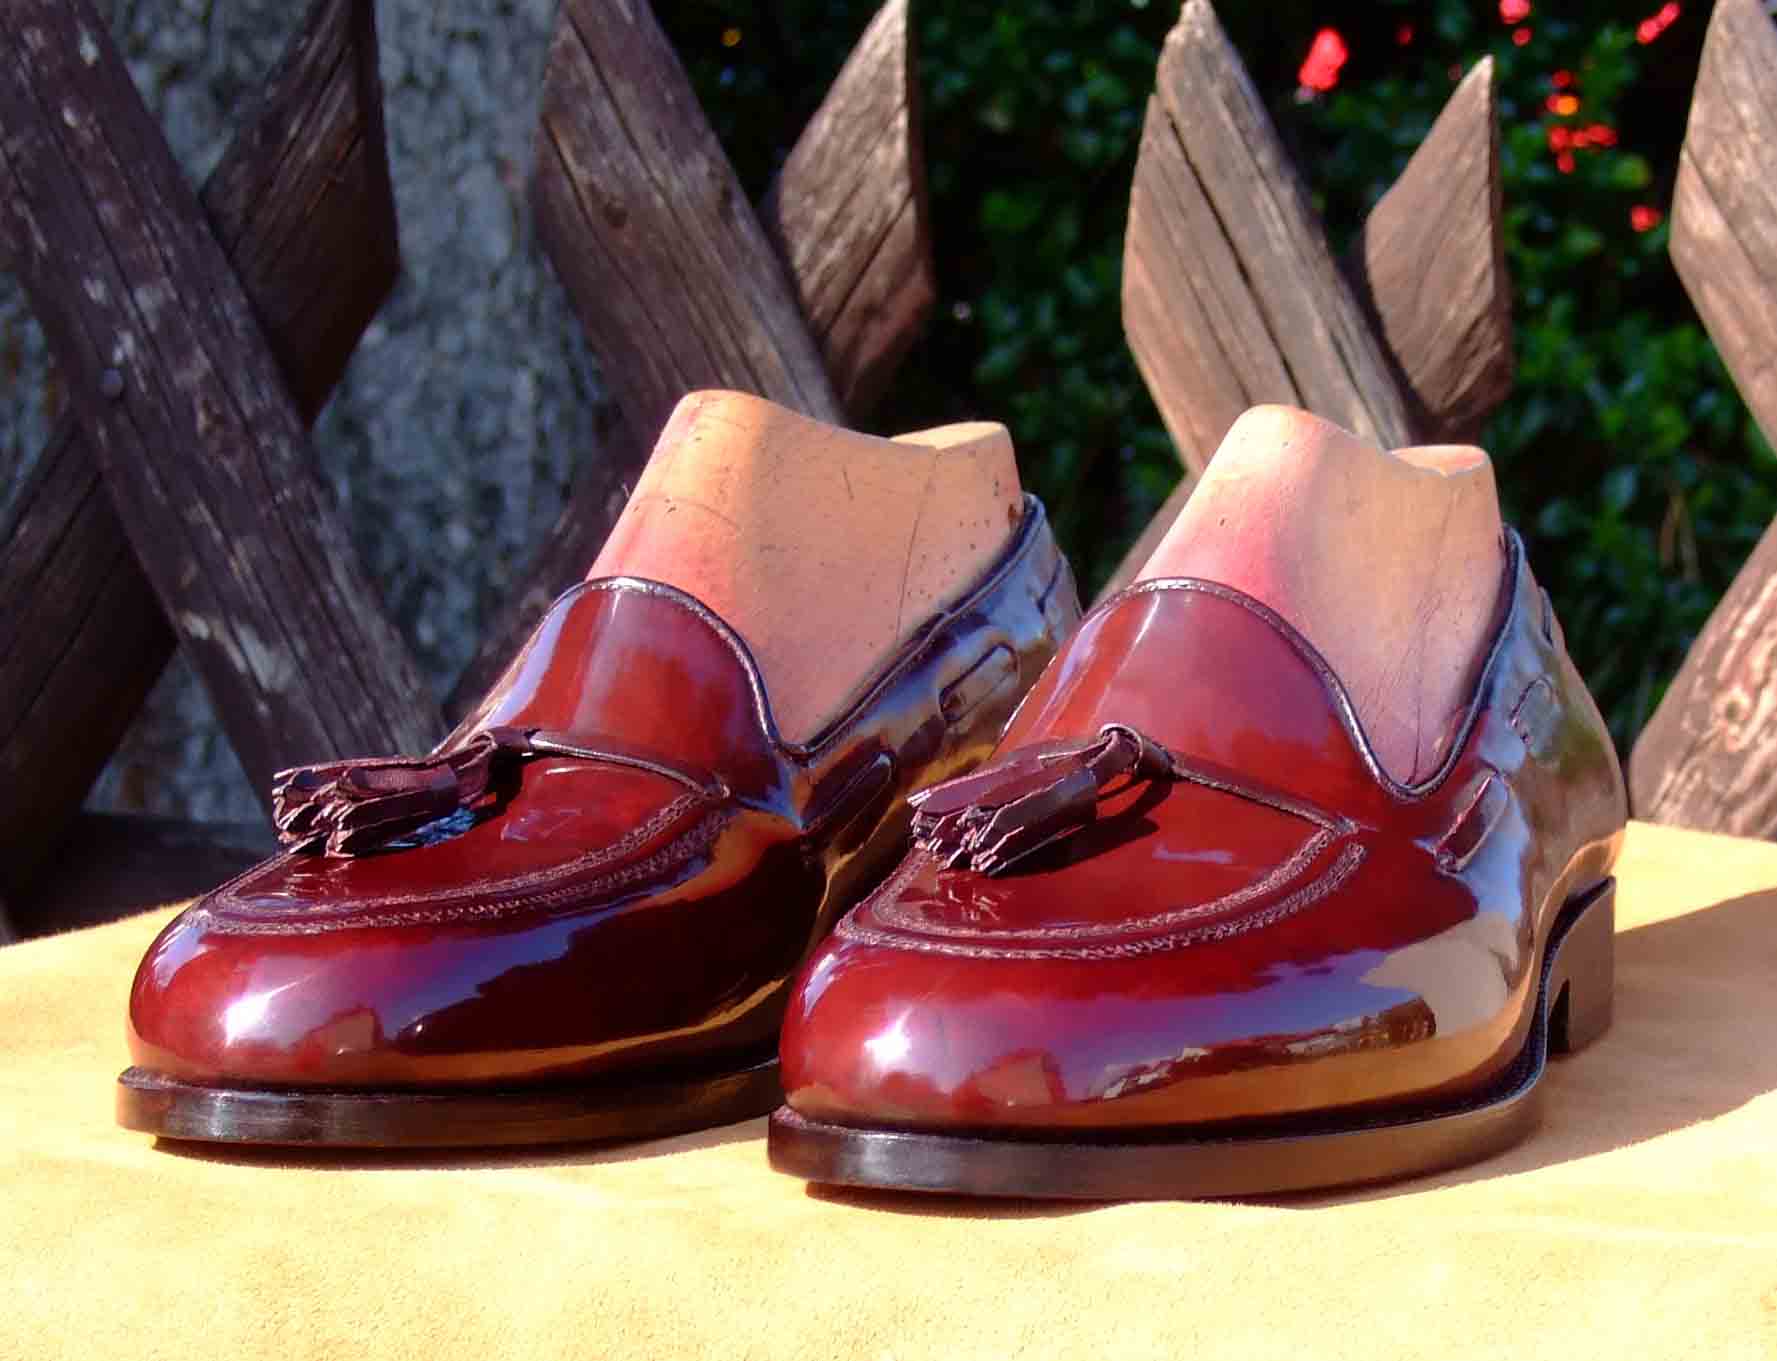 Shell cordovan is noted for a natural high glass shine